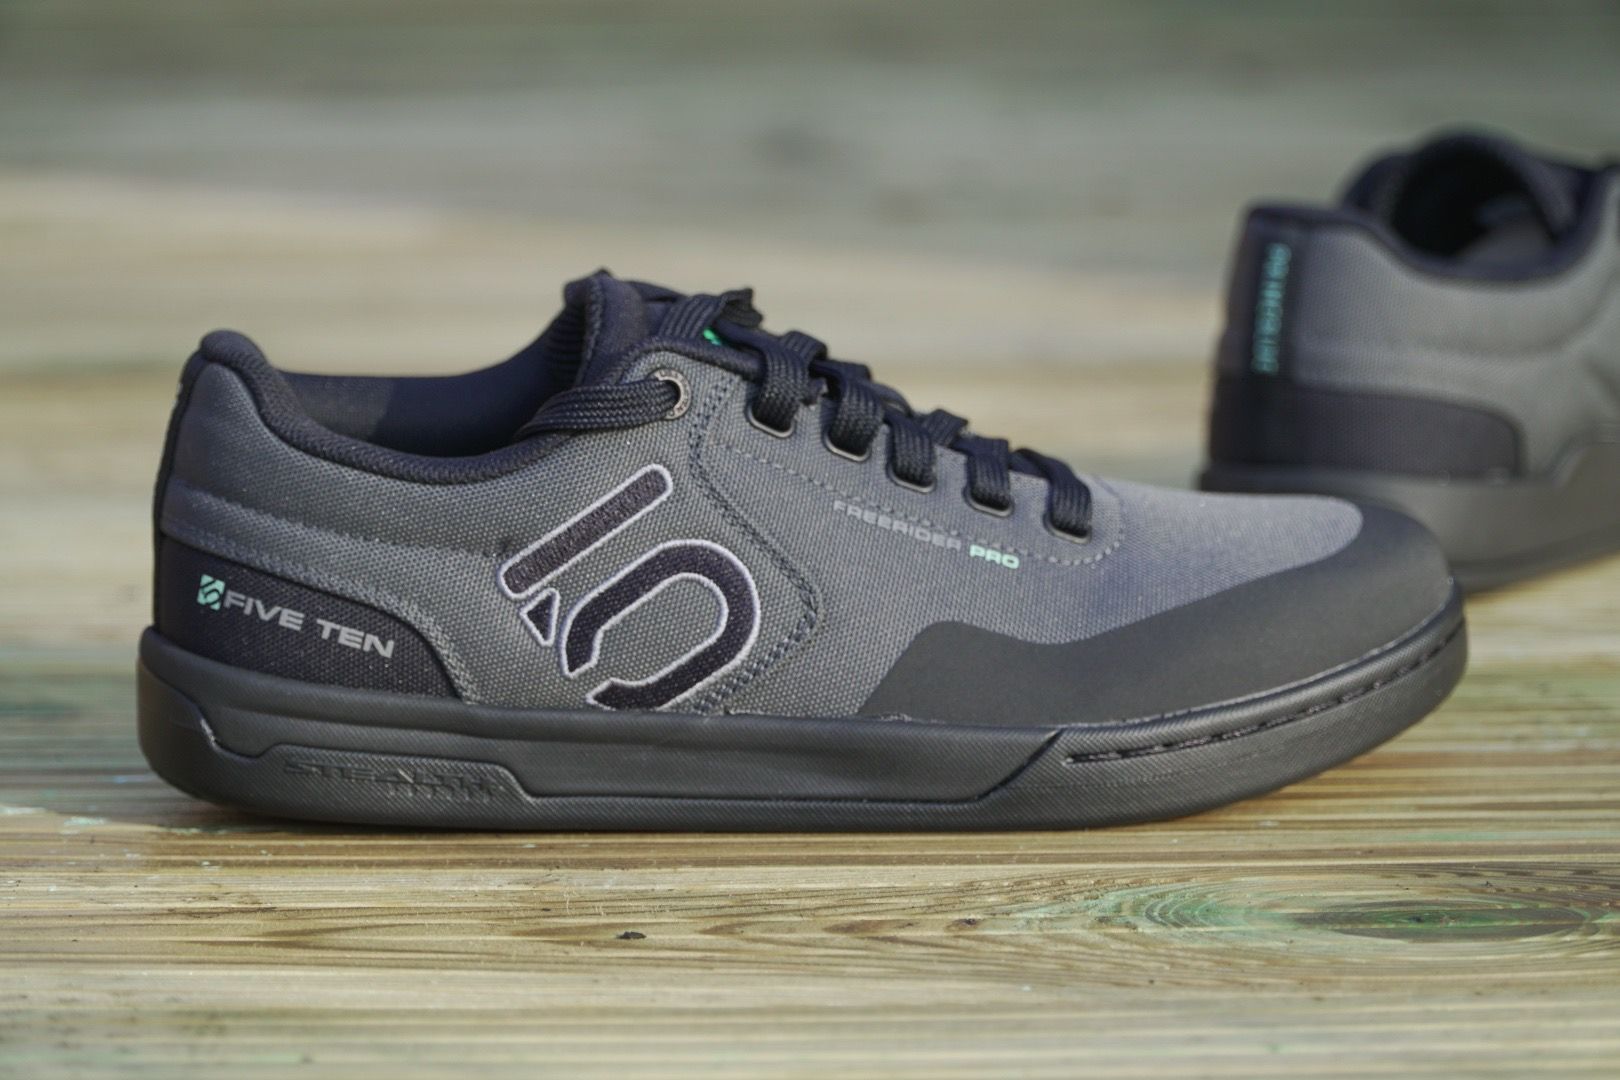 Five Ten Parley Primeblue Recycled Freerider Pro Shoes